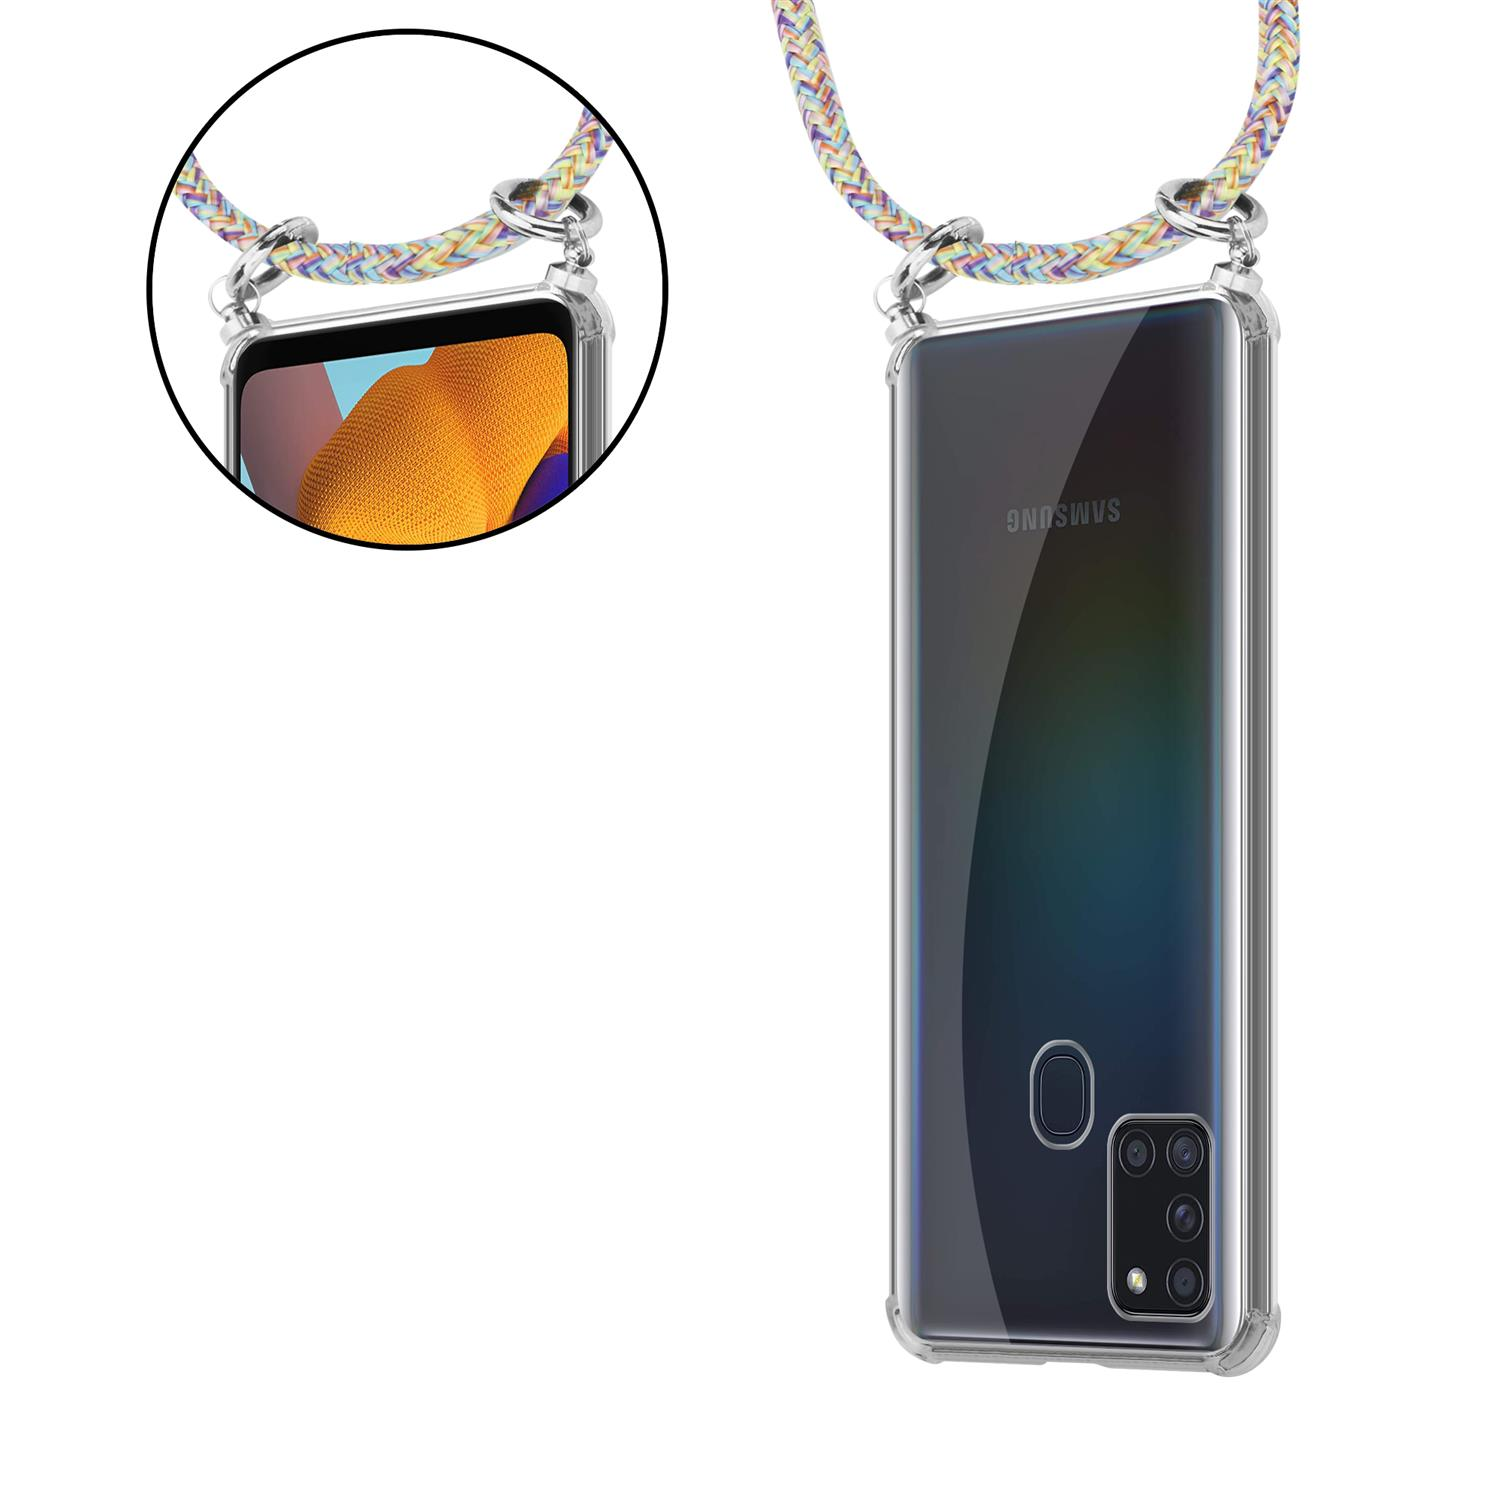 Backcover, Handy Silber und Kette Ringen, Kordel abnehmbarer Band A21s, Galaxy CADORABO mit RAINBOW Samsung, Hülle,